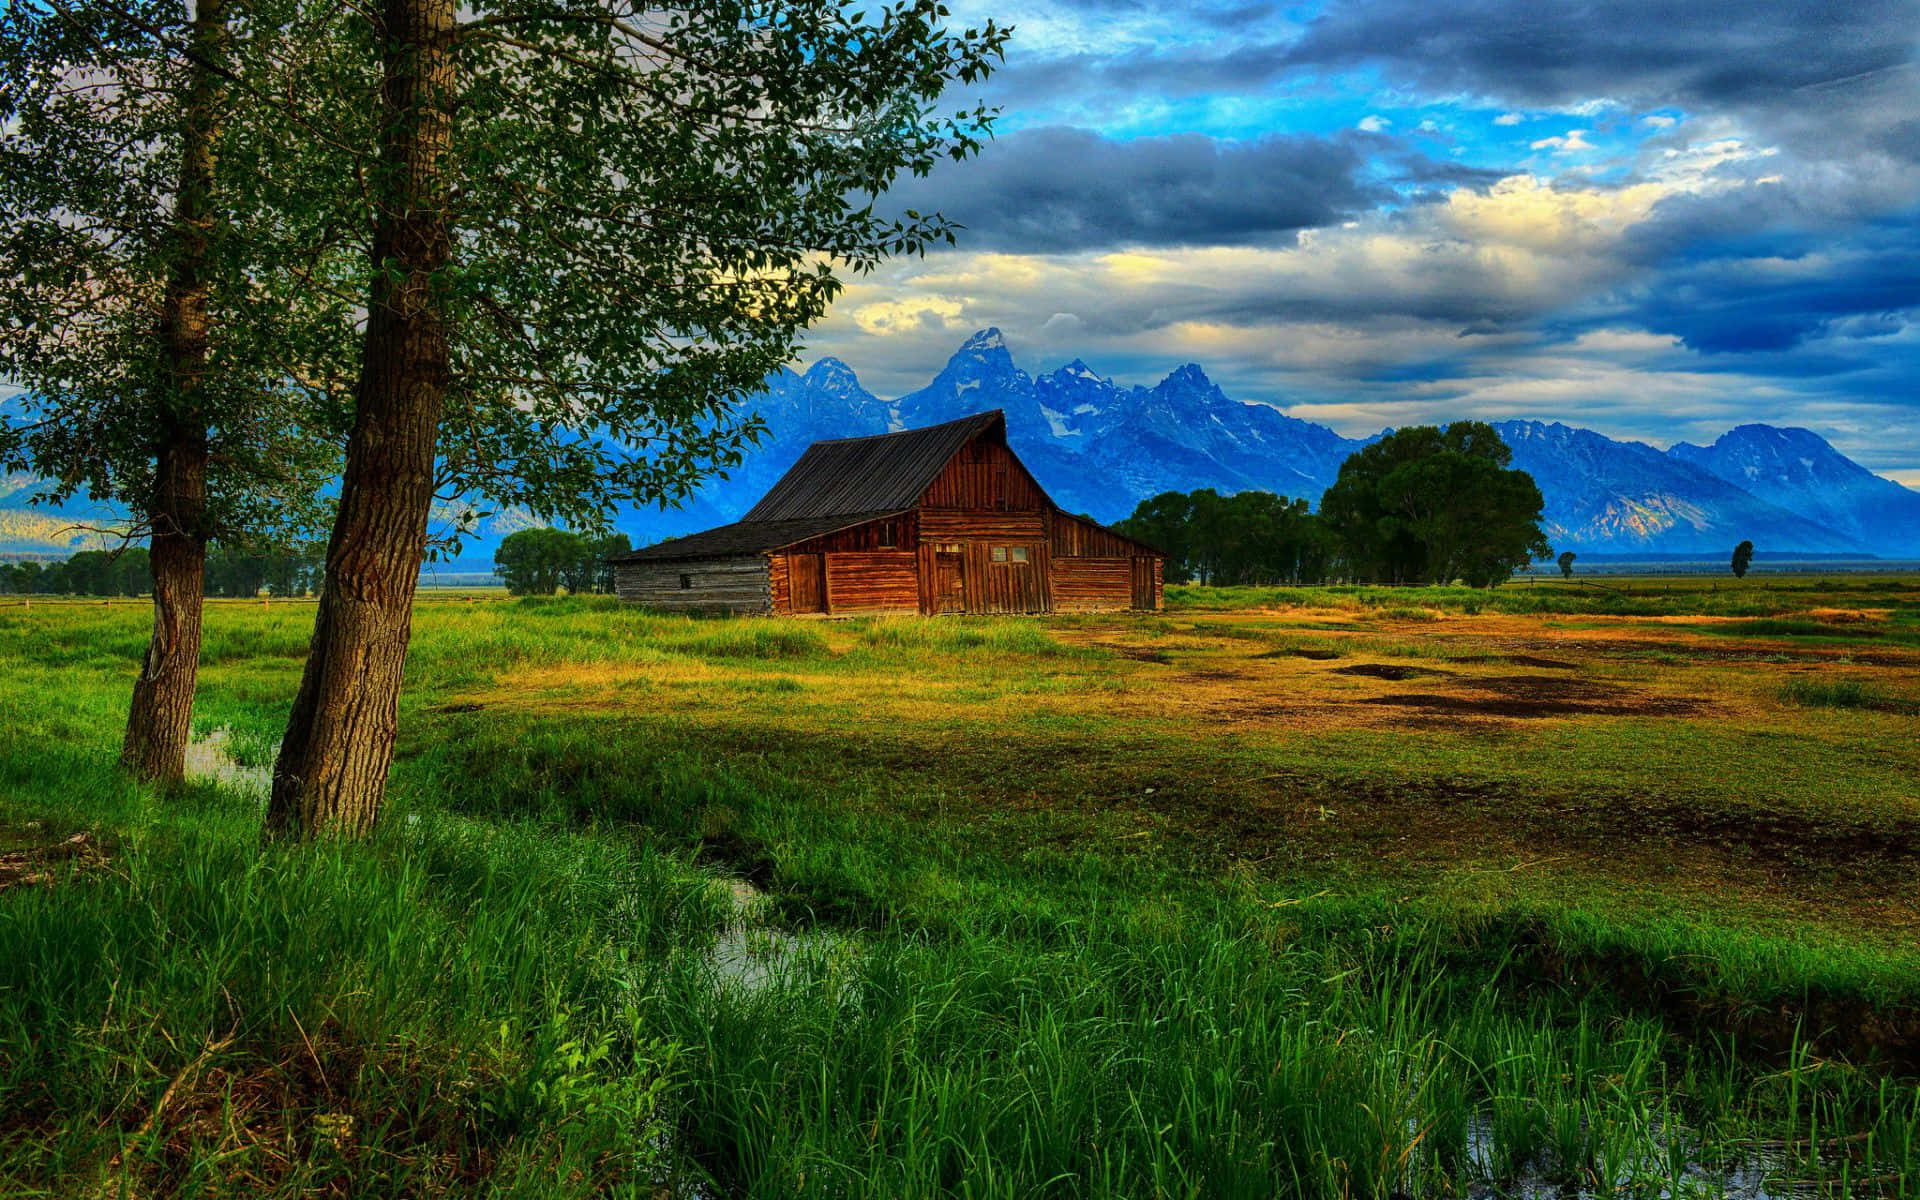 Image  An old wooden barn with a warm and inviting atmosphere